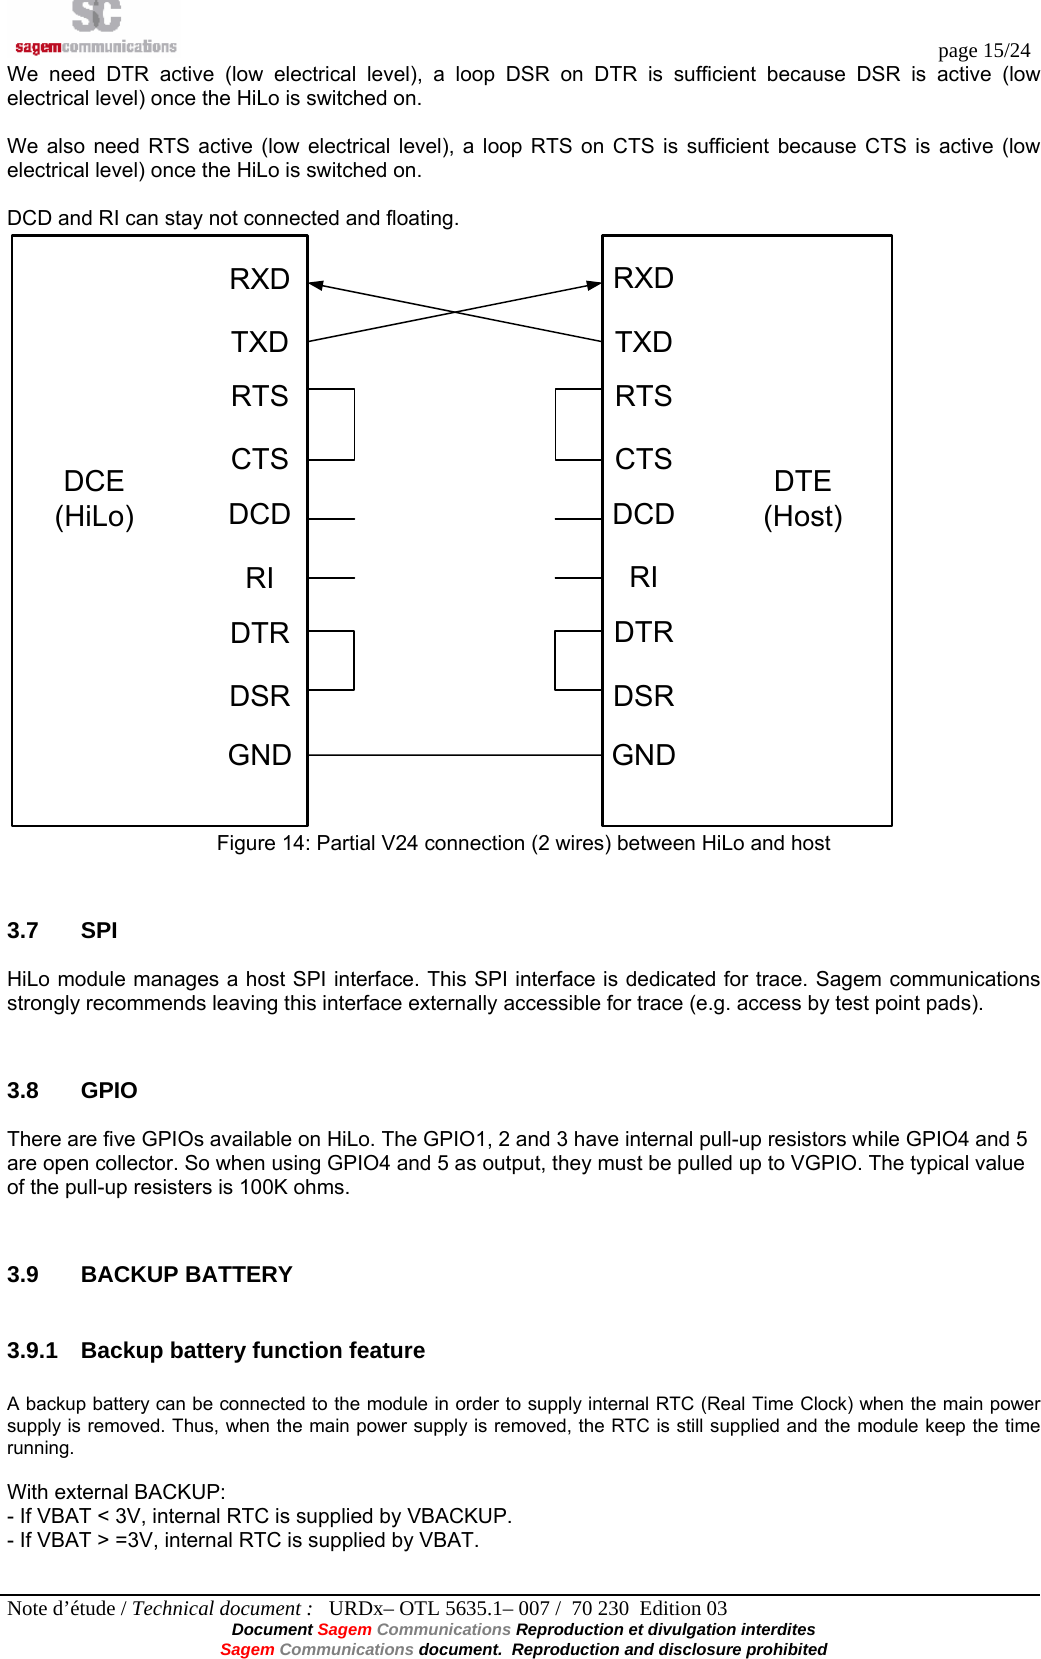  page 15/24 Note d’étude / Technical document :   URDx– OTL 5635.1– 007 /  70 230  Edition 03 Document Sagem Communications Reproduction et divulgation interdites Sagem Communications document.  Reproduction and disclosure prohibited We need DTR active (low electrical level), a loop DSR on DTR is sufficient because DSR is active (low electrical level) once the HiLo is switched on.  We also need RTS active (low electrical level), a loop RTS on CTS is sufficient because CTS is active (low electrical level) once the HiLo is switched on.  DCD and RI can stay not connected and floating. RXDTXDRTSCTSDCDRIDTRDSRRXDTXDRTSCTSDCDRIDTRDSRDCE(HiLo)DTE(Host)GND GND Figure 14: Partial V24 connection (2 wires) between HiLo and host  3.7 SPI HiLo module manages a host SPI interface. This SPI interface is dedicated for trace. Sagem communications strongly recommends leaving this interface externally accessible for trace (e.g. access by test point pads).  3.8 GPIO There are five GPIOs available on HiLo. The GPIO1, 2 and 3 have internal pull-up resistors while GPIO4 and 5 are open collector. So when using GPIO4 and 5 as output, they must be pulled up to VGPIO. The typical value of the pull-up resisters is 100K ohms.  3.9 BACKUP BATTERY 3.9.1  Backup battery function feature  A backup battery can be connected to the module in order to supply internal RTC (Real Time Clock) when the main power supply is removed. Thus, when the main power supply is removed, the RTC is still supplied and the module keep the time running.  With external BACKUP: - If VBAT &lt; 3V, internal RTC is supplied by VBACKUP. - If VBAT &gt; =3V, internal RTC is supplied by VBAT.  